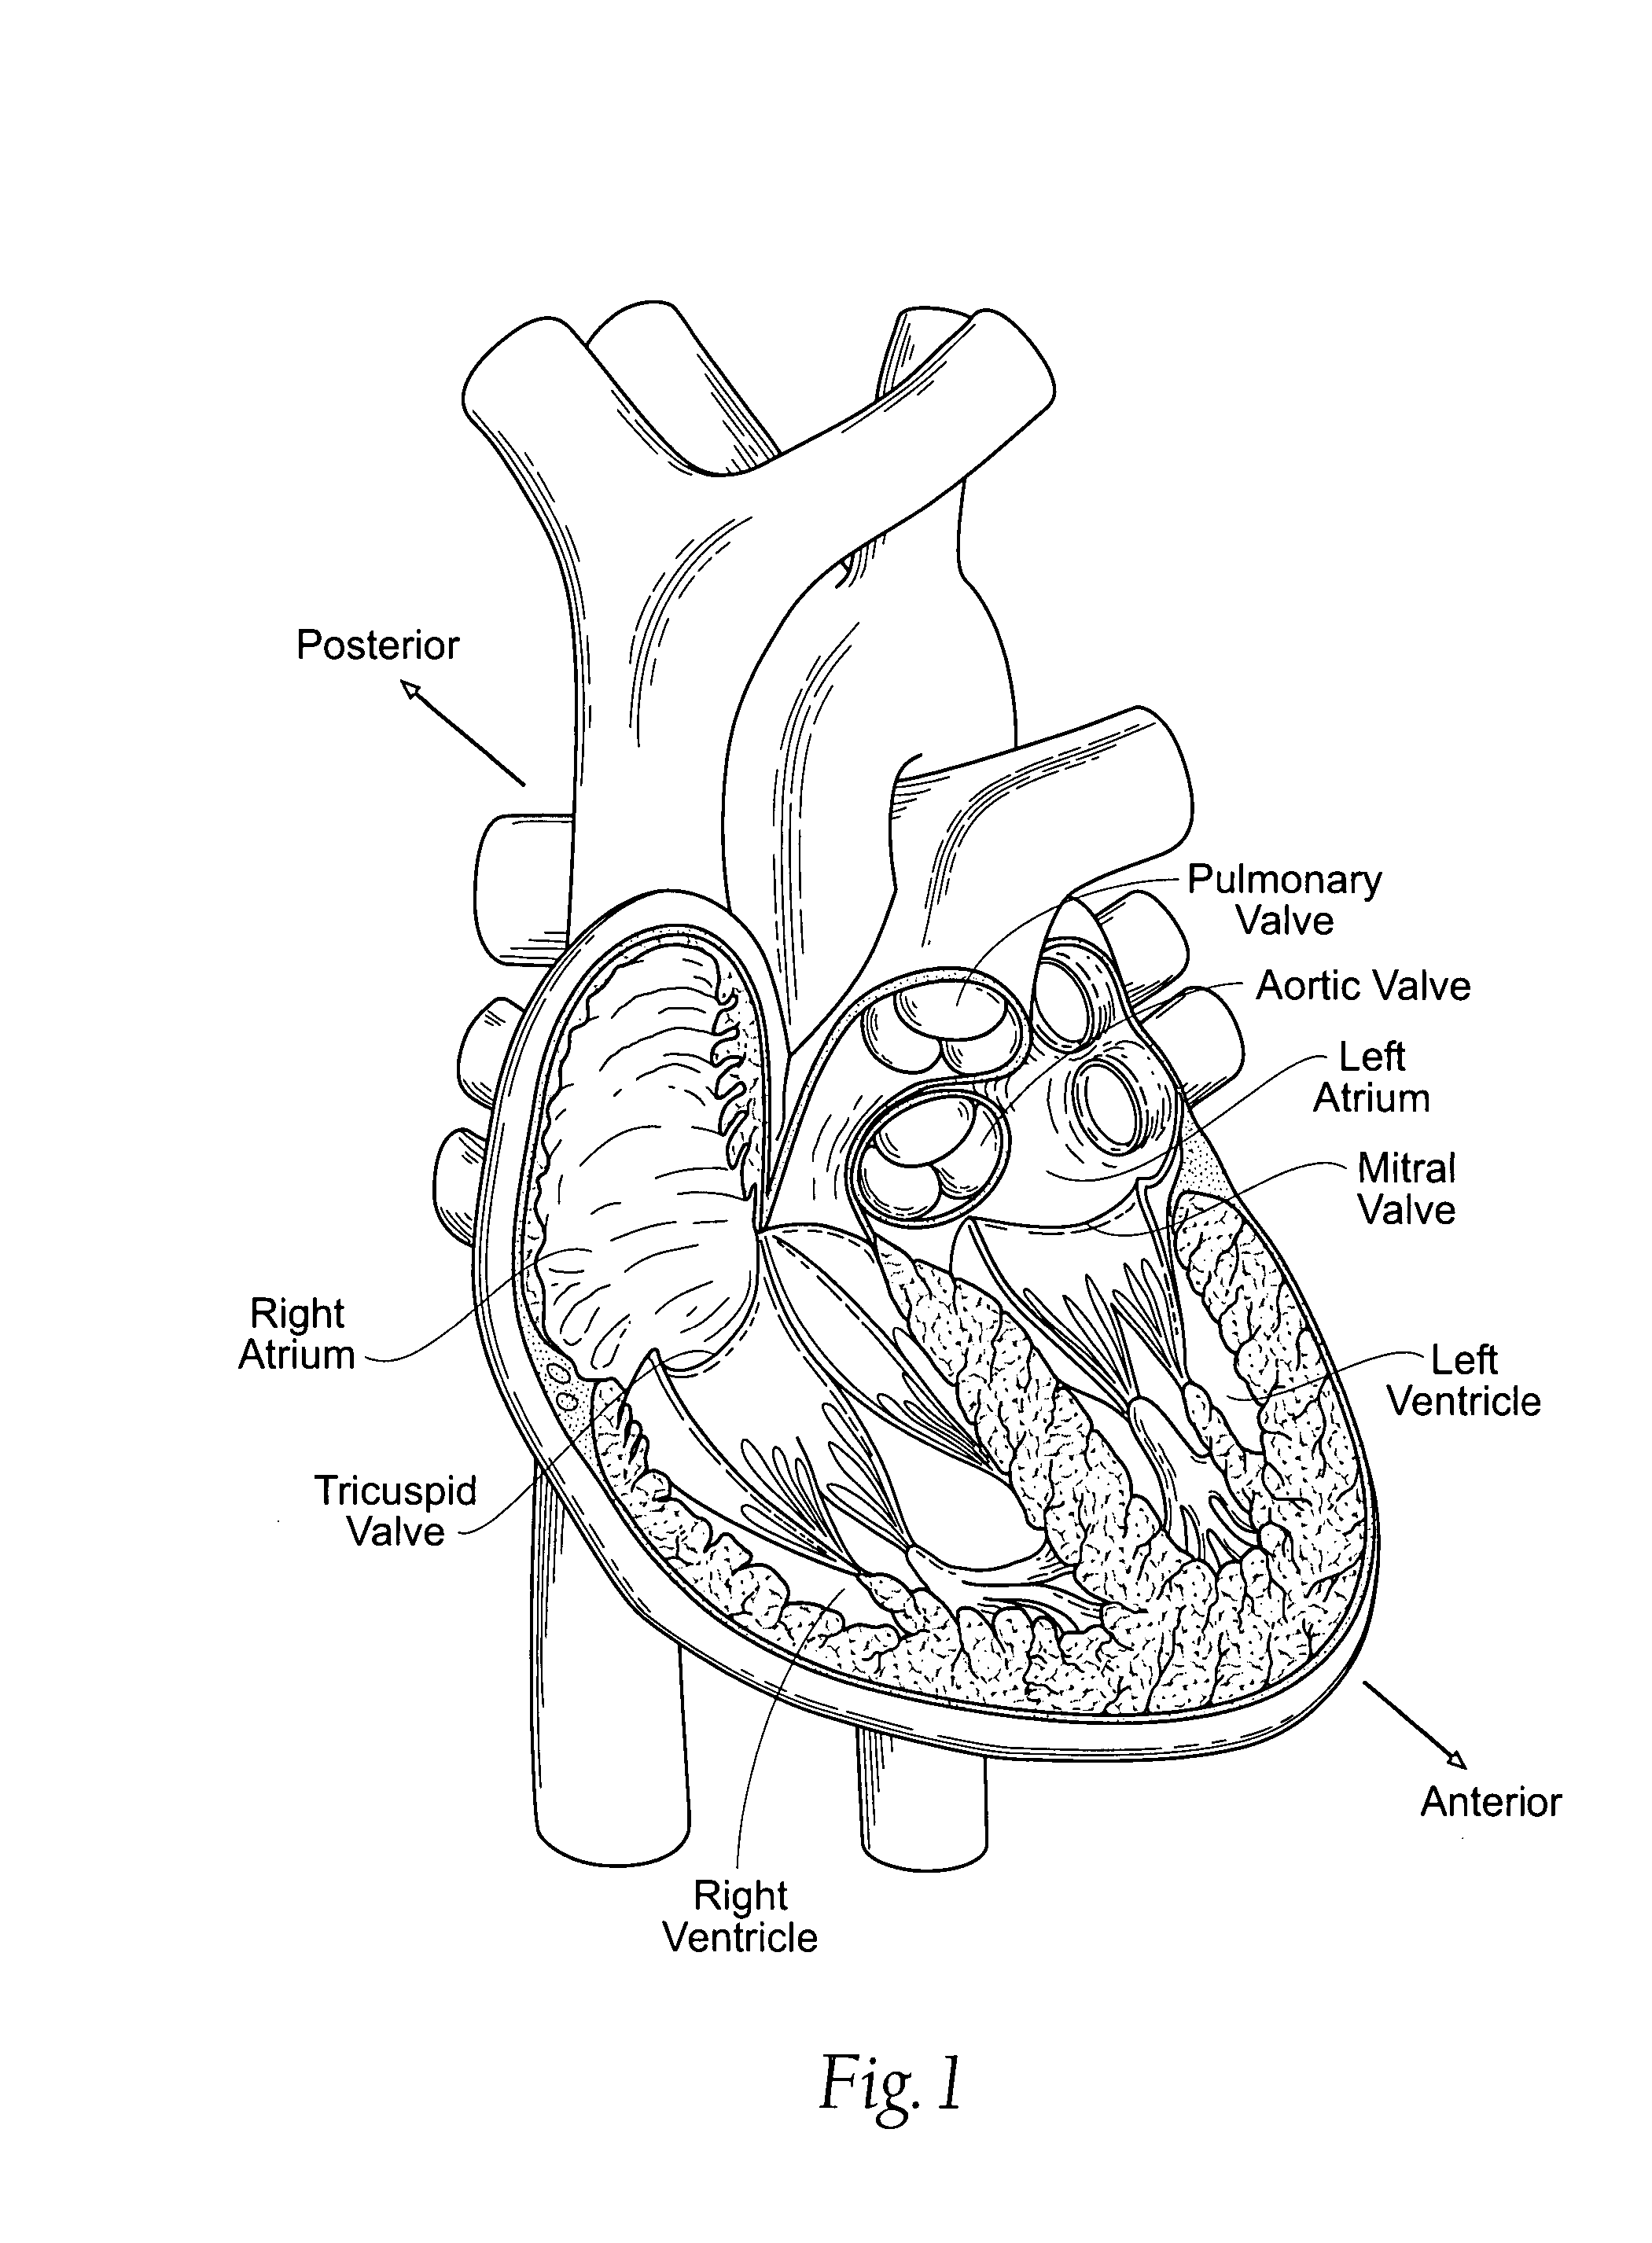 Devices, systems, and methods for reshaping a heart valve annulus, including the use of a bridge implant having an adjustable bridge stop